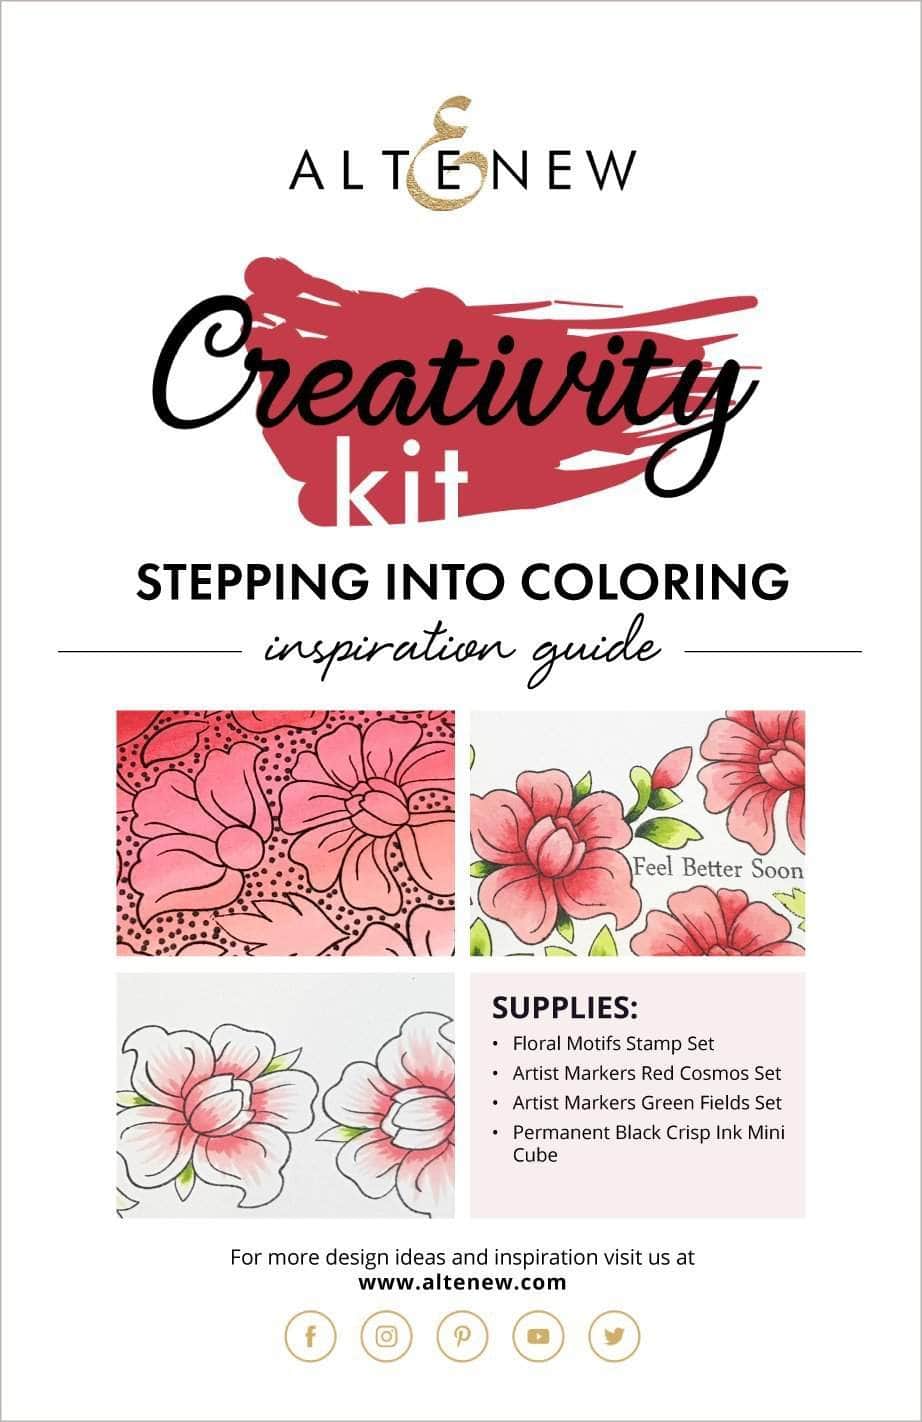 Printed Media Stepping Into Coloring Creativity Kit Inspiration Guide